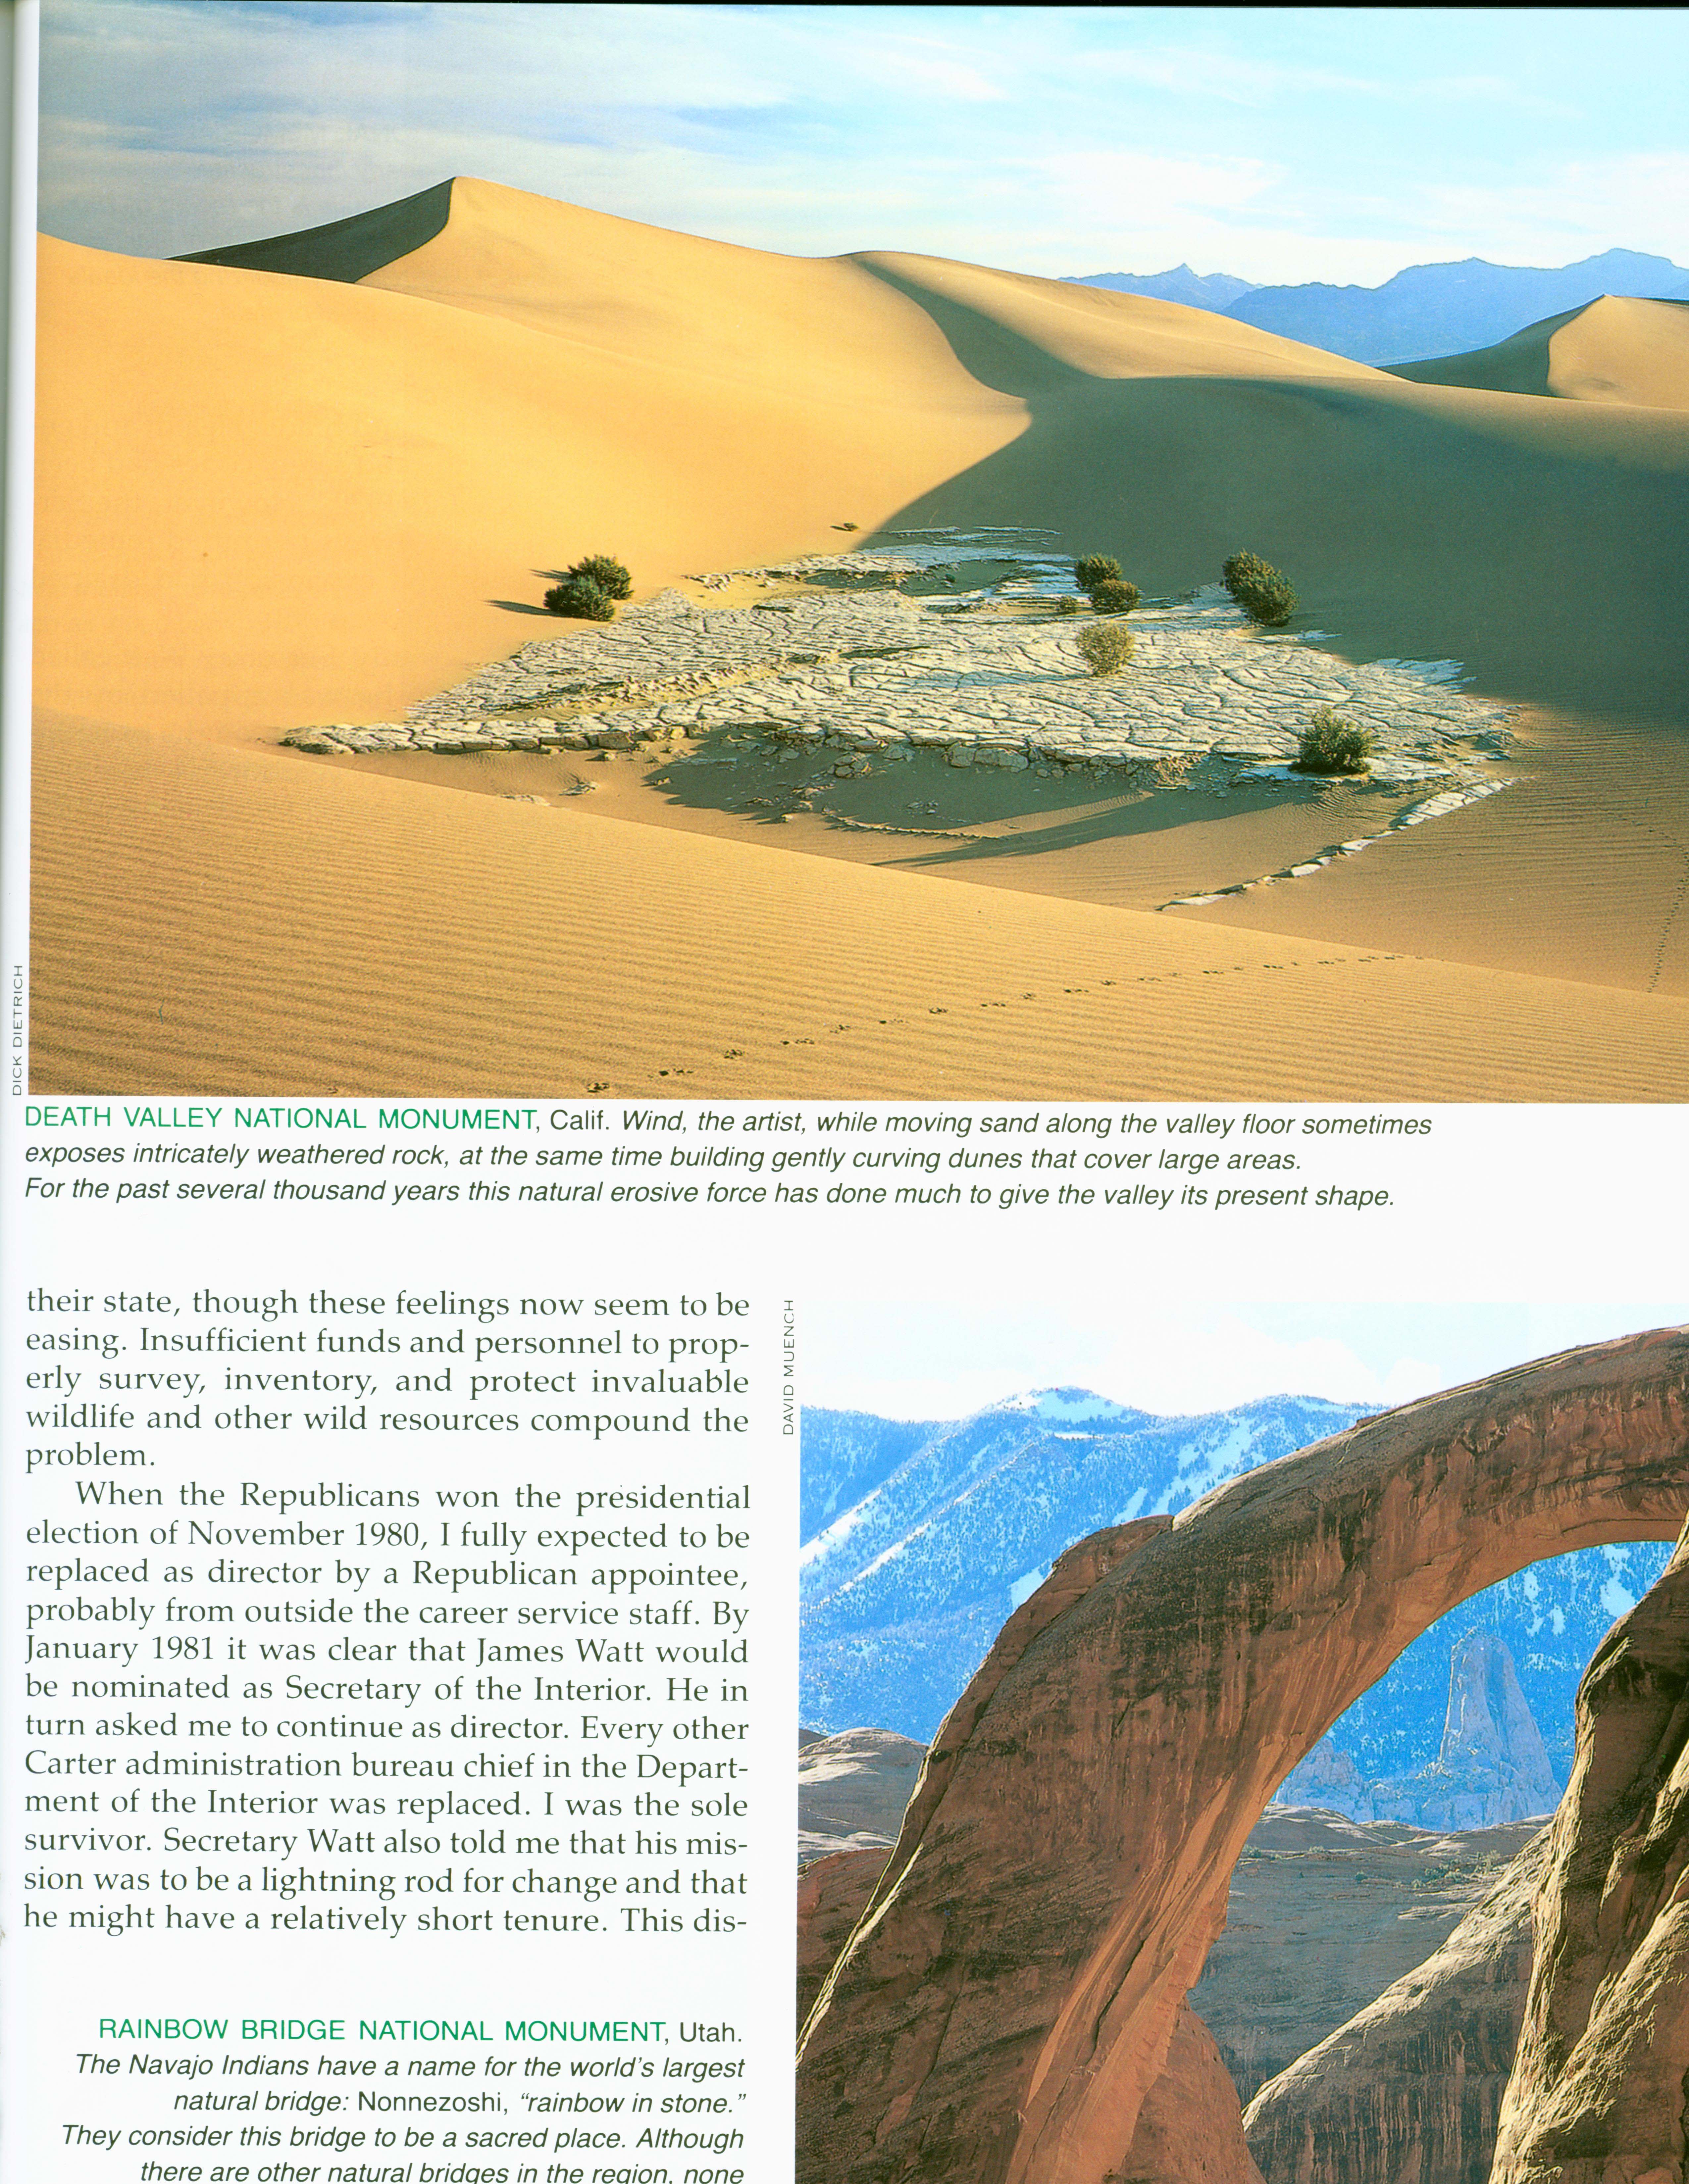 NATIONAL PARK SERVICE: the story behind the scenery. KCPU8068b